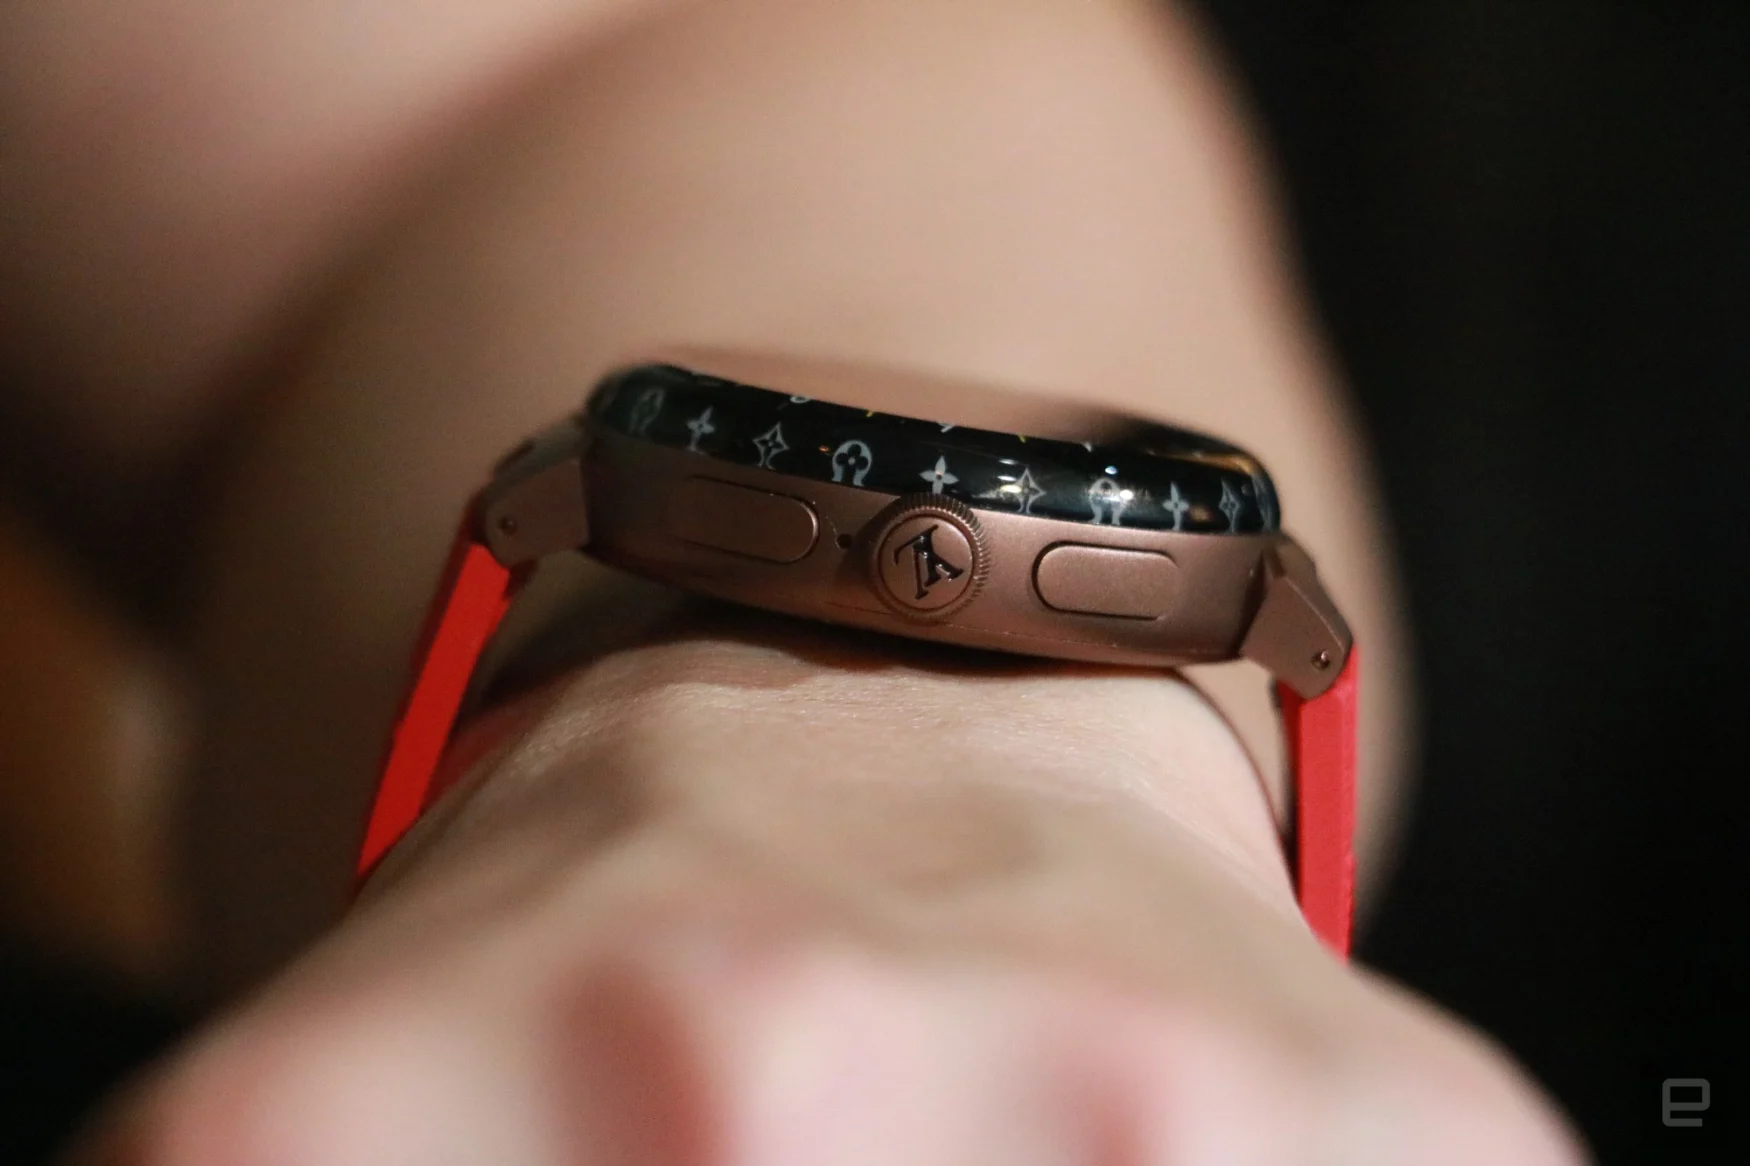 Side view of the Louis Vuitton Tambour Horizon Light Up smartwatch, showing the company's logo on its dial and two other buttons on the edge.